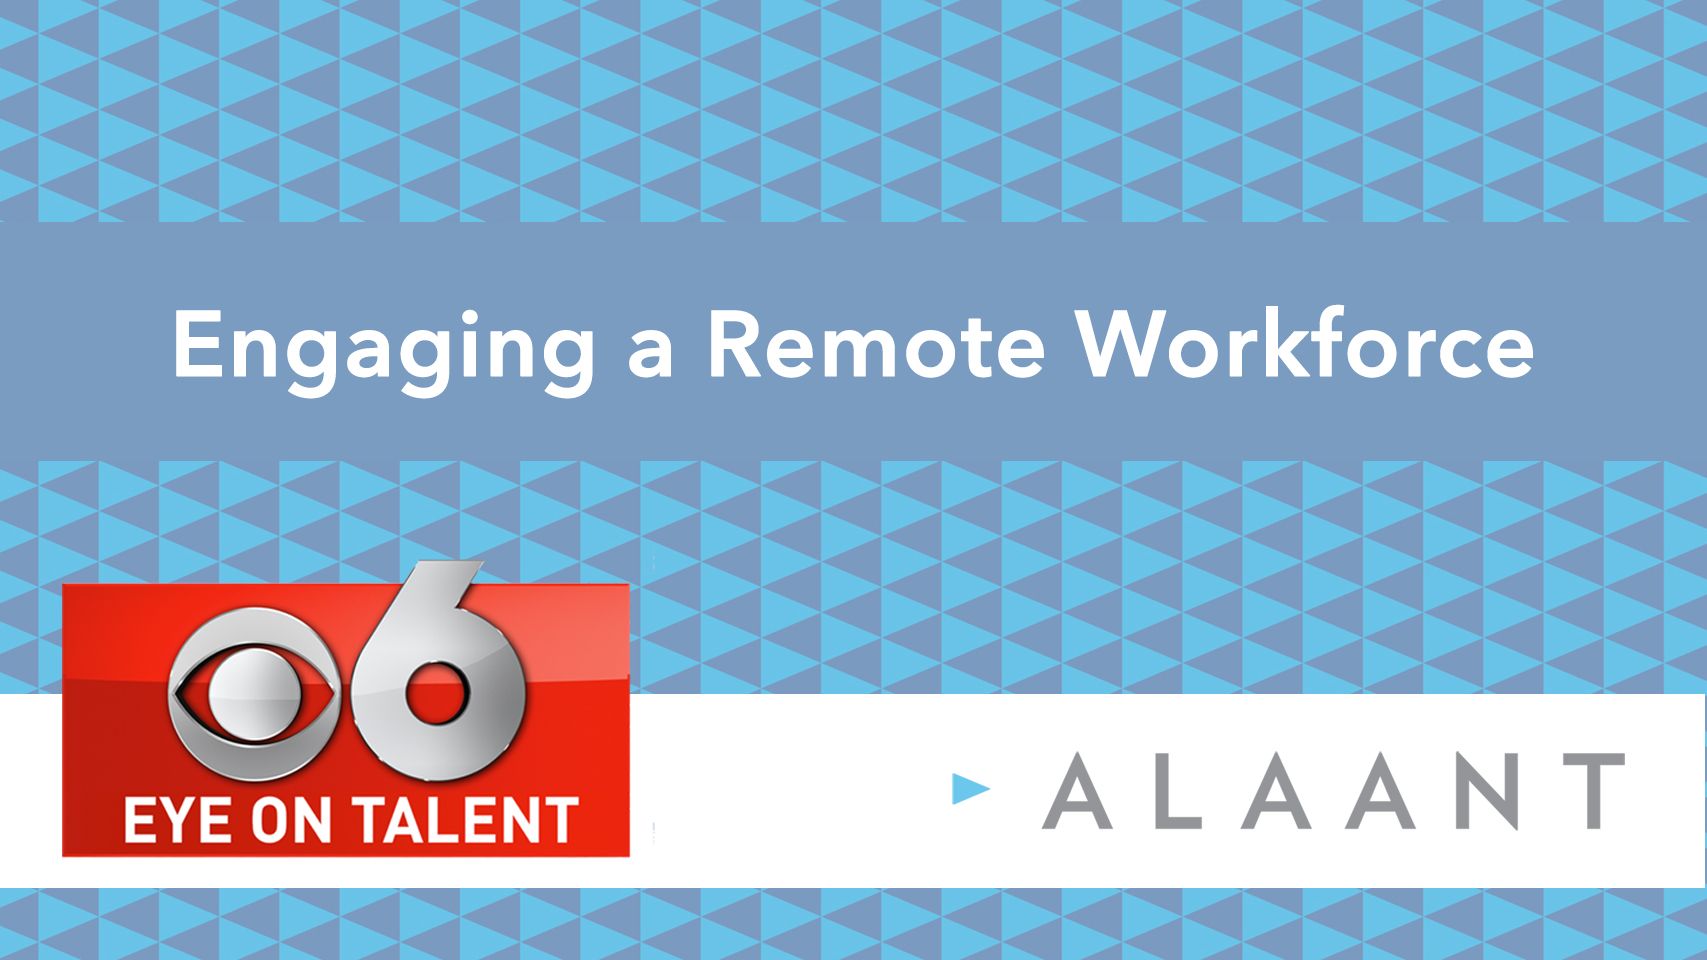 Alaant Eye on Talent Engaging a Remote Workforce